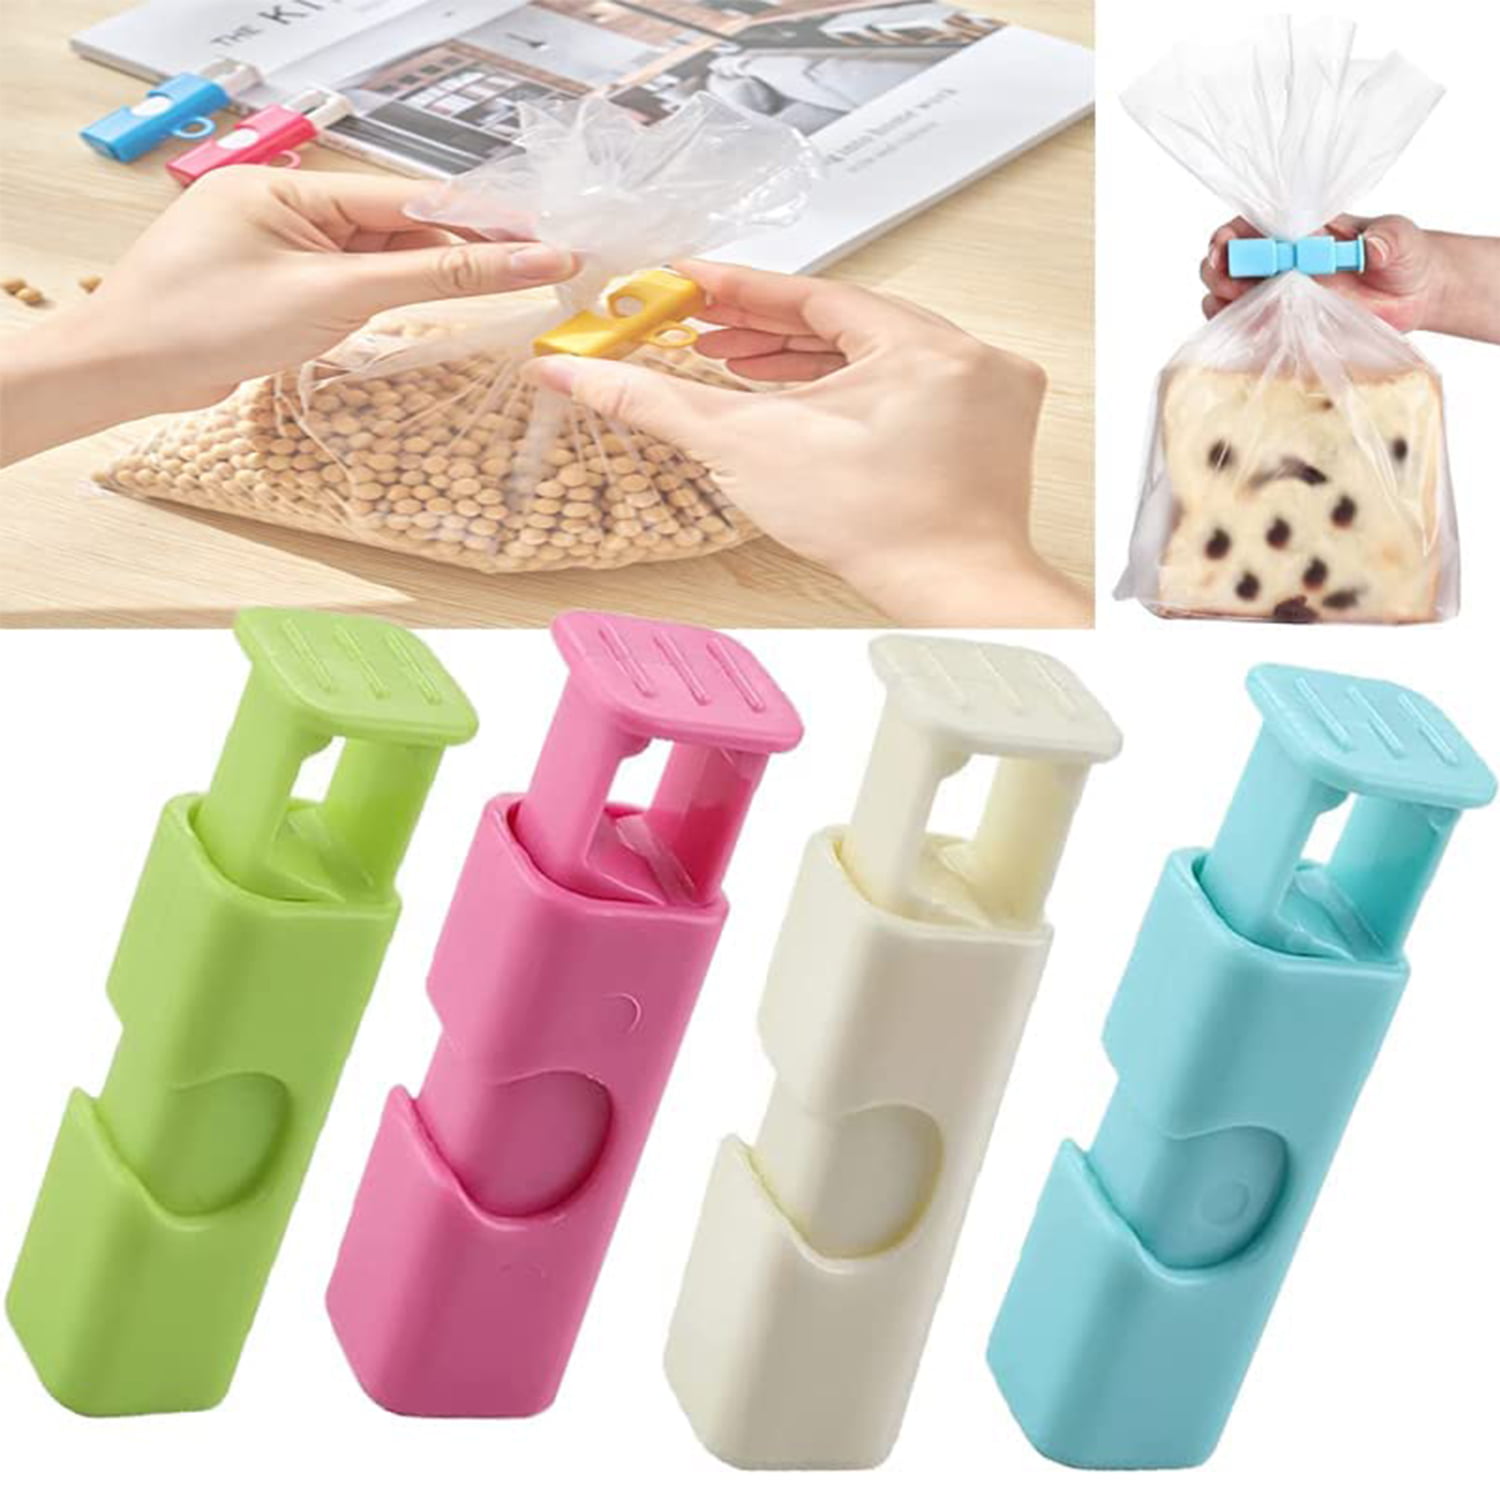 Set of 6 Bread Bag Clips - Cinch Non-Slip Grip Easy Squeeze and Lock - Features 3 Colors for Labeled Organizing